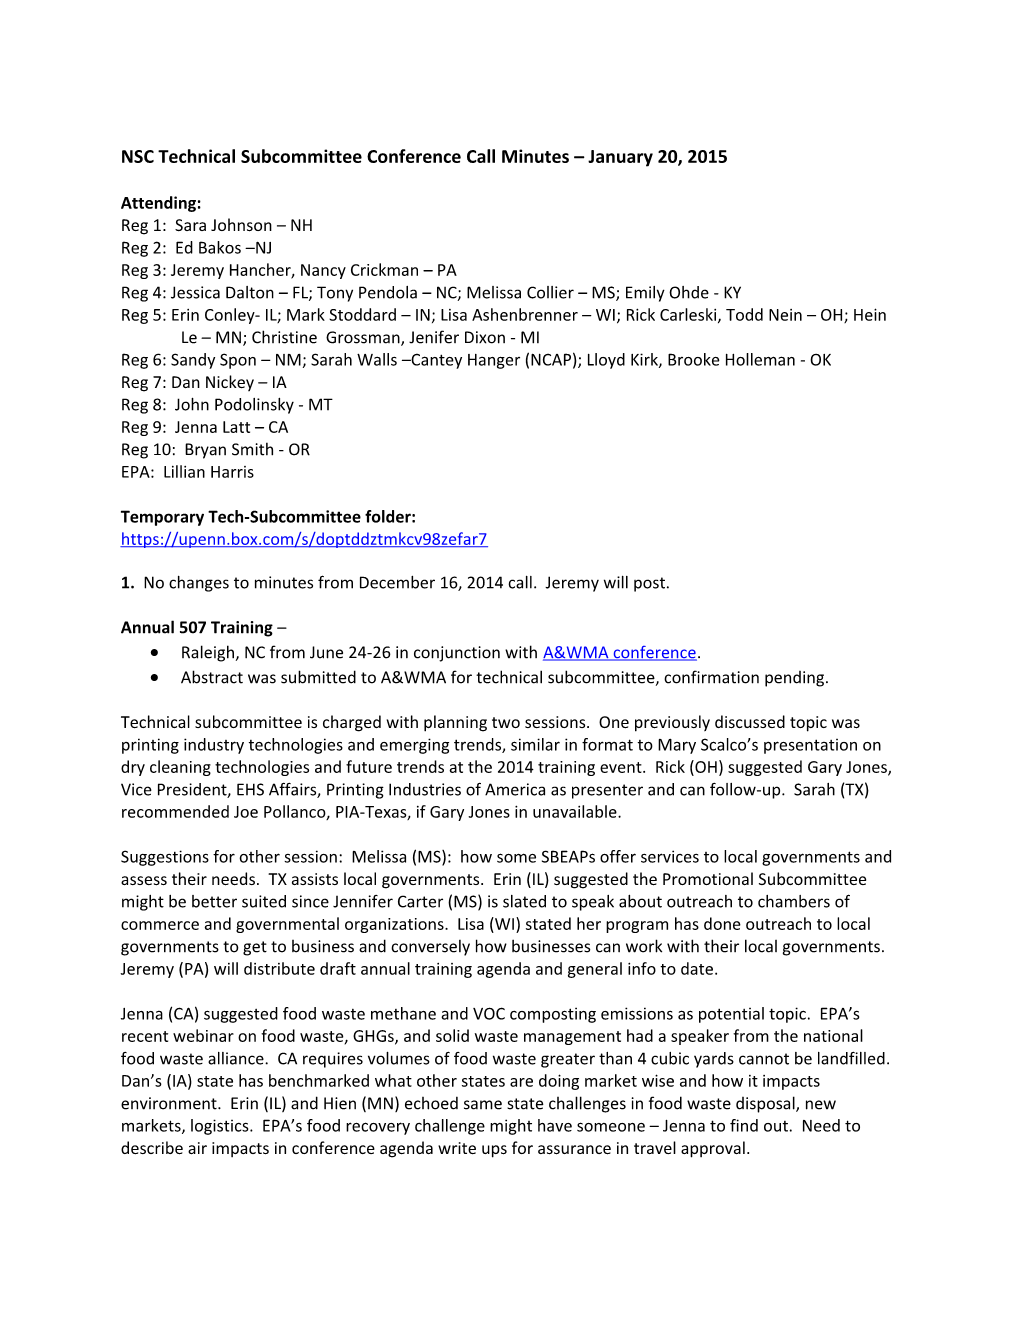 NSC Technical Subcommittee Conference Call Minutes January 20, 2015